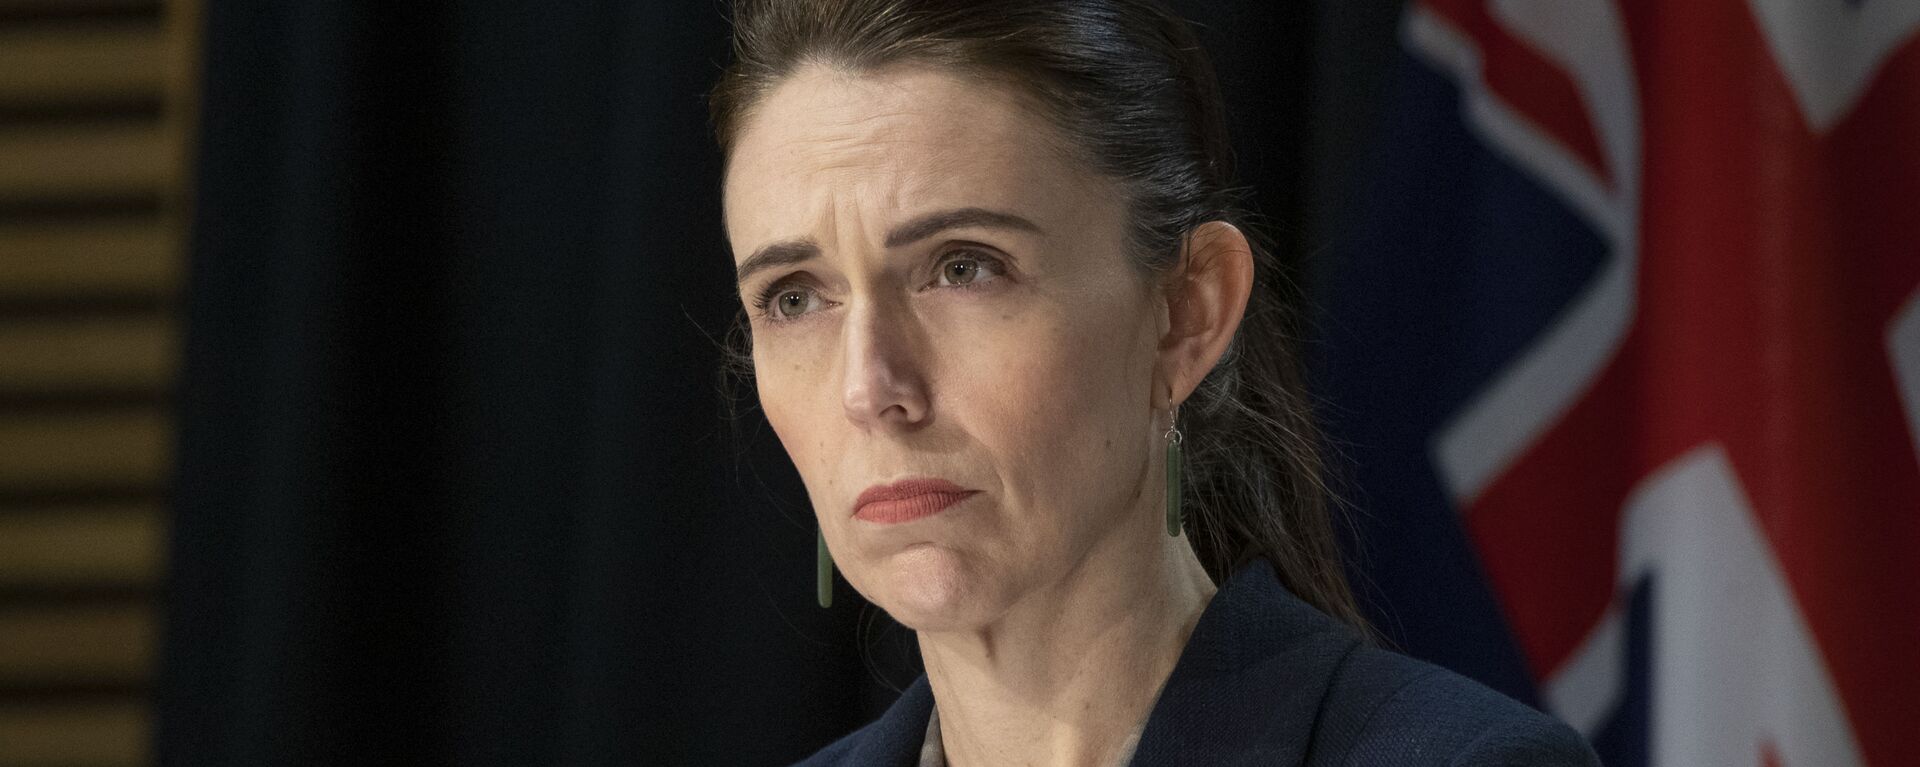 New Zealand's Prime Minister Jacinda Ardern speaks during a press conference in Wellington on September 4, 2021, following the country's first Covid-related death in six months and the day after an IS-inspired attacker injured six people in a knife rampage before being shot dead by undercover police.  - Sputnik International, 1920, 20.03.2022